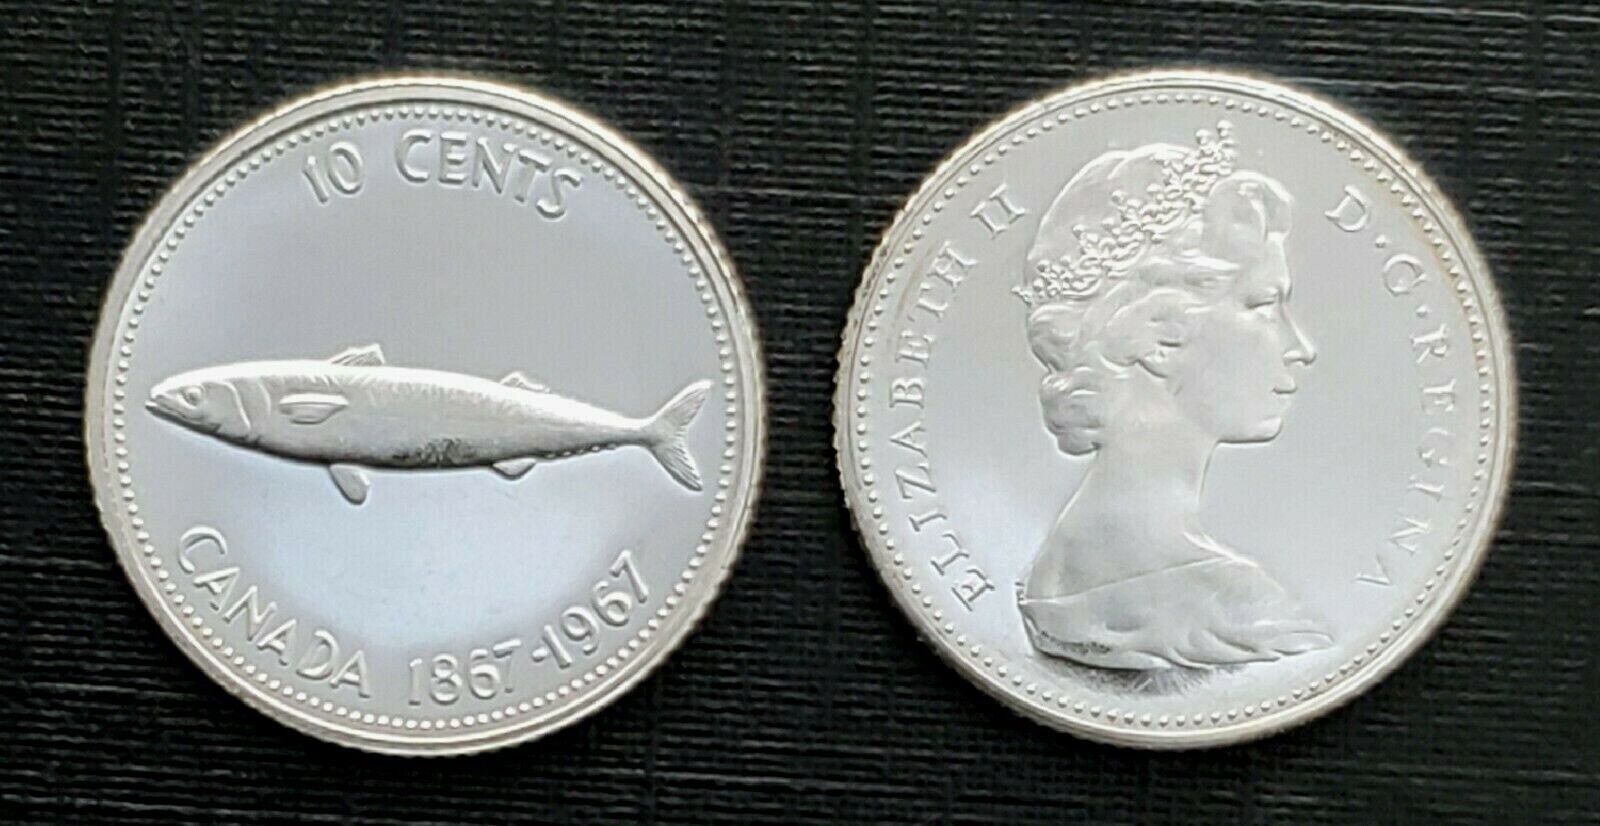 Canada 1967 Proof Like Silver Ten Cent Piece - Dime!!